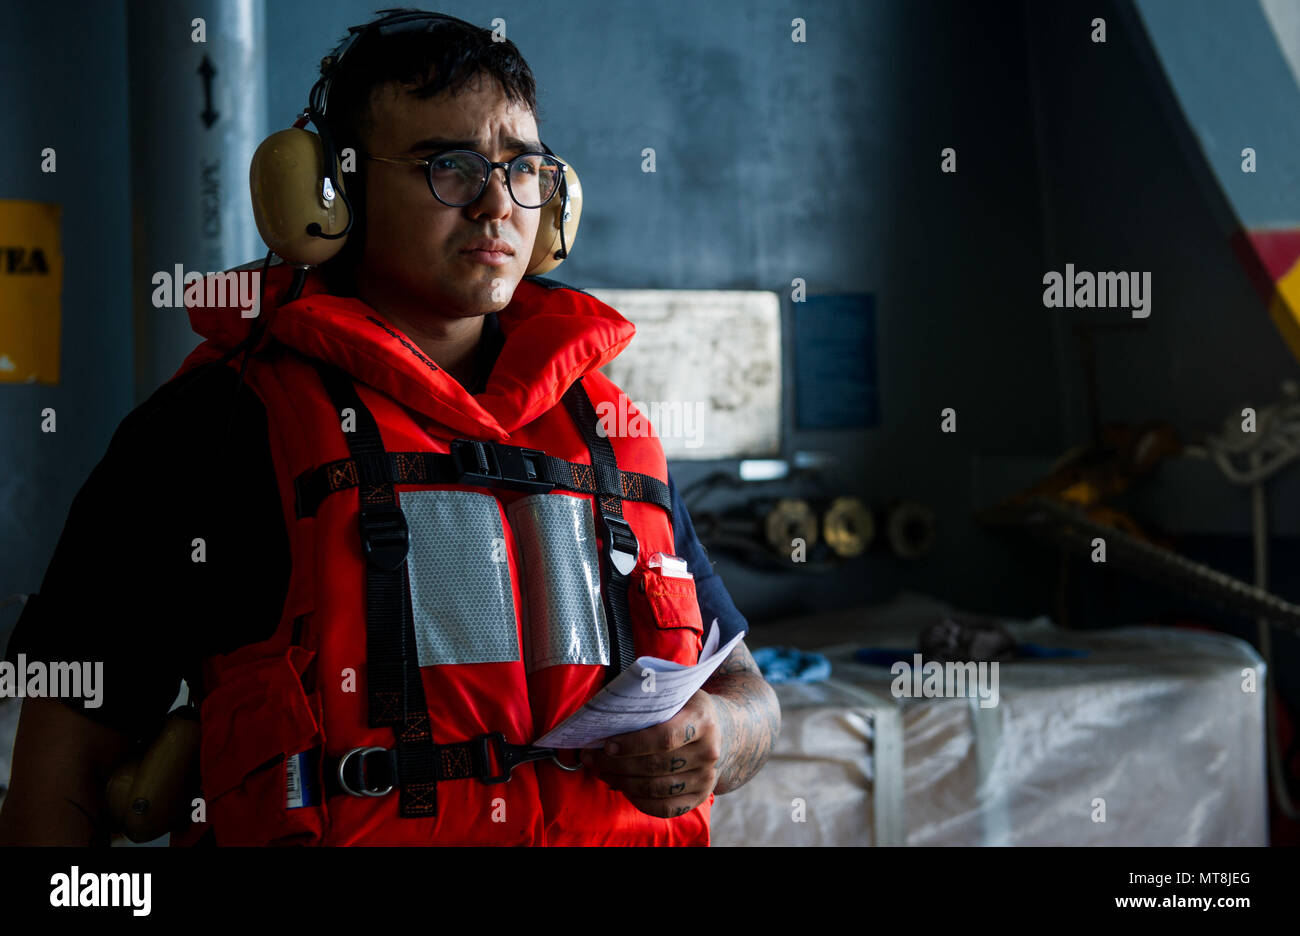 180515-N-OY799-0210 WATERS SOUTH OF JAPAN (May 15, 2018) Boatswain's Mate Seaman Yoshua Nunez, from Orlando, Florida, mans a sound-powered telephone in the hangar bay aboard the Navy's forward-deployed aircraft carrier, USS Ronald Reagan (CVN 76), as part of a replenishment-at-sea with Military Sealift Command (MSC) dry cargo/ammunition ship USNS Cesar Chavez (T-AKE 14), during sea trials. The non-combatant, civilian-crewed ship, operated by MSC, provides fuel, food, ordnance, spare parts, mail and other supplies to Navy ships throughout the world. Ronald Reagan, the flagship of Carrier Strike Stock Photo